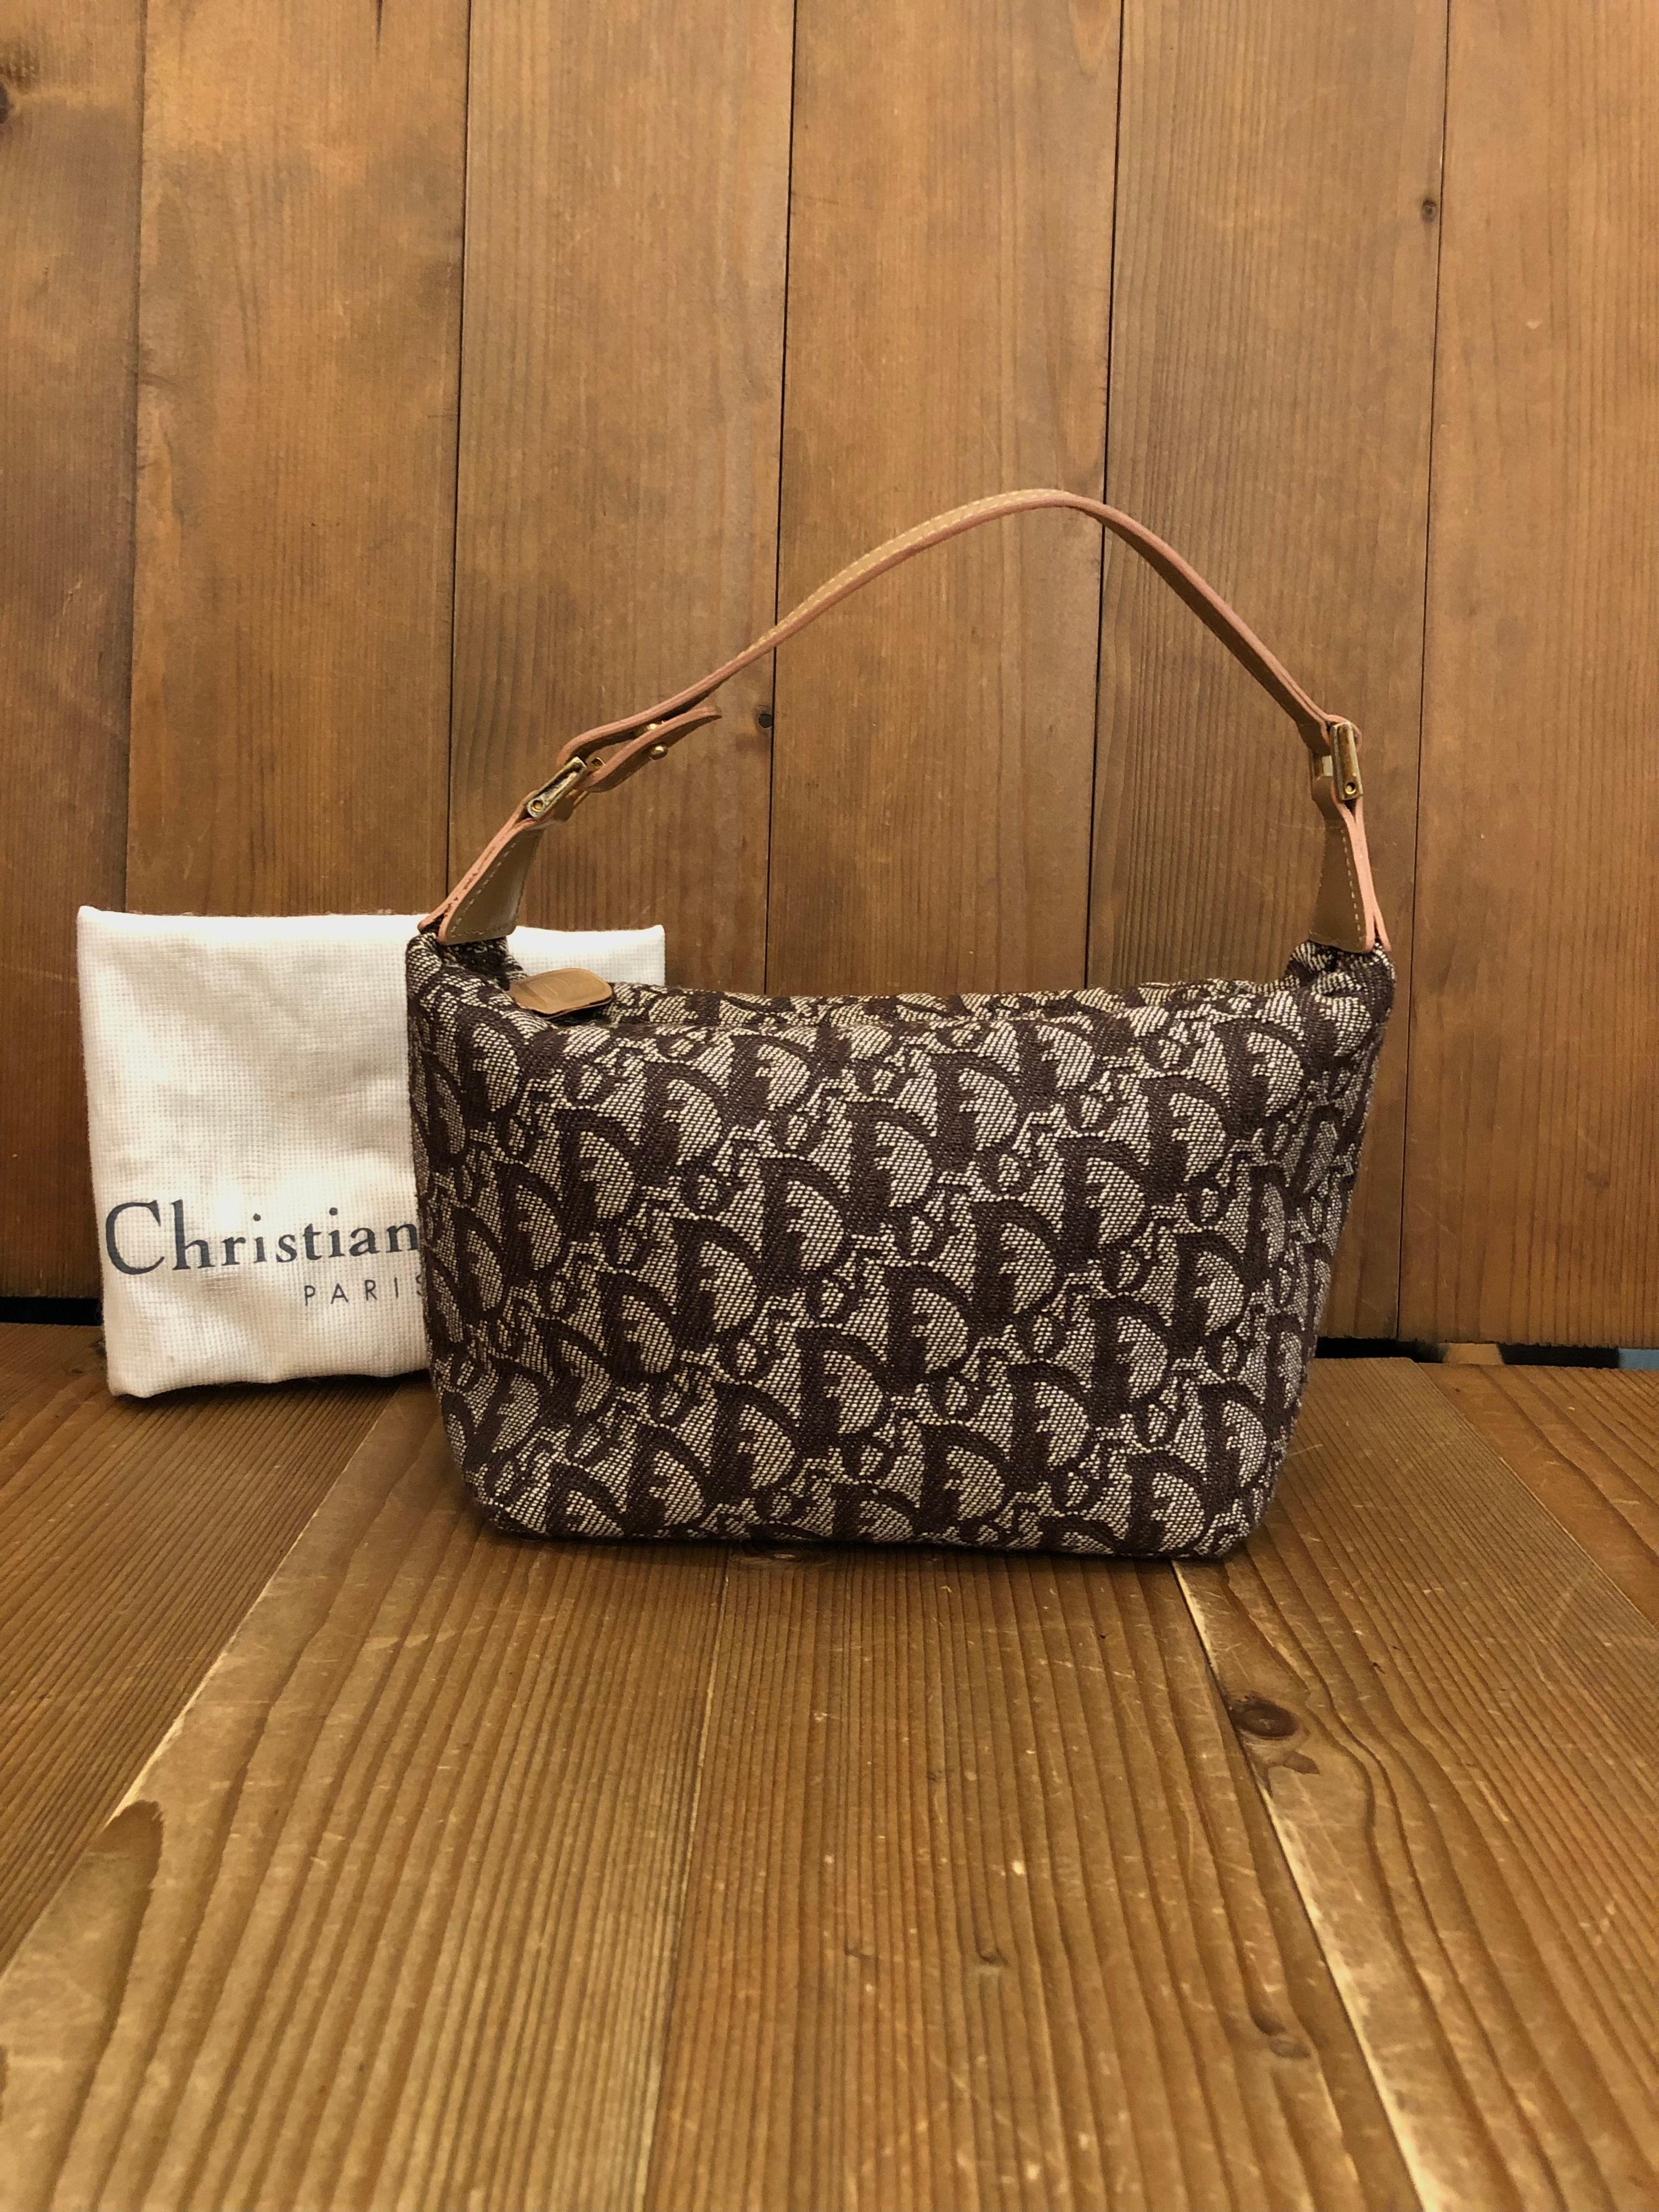 This vintage Christian Dior pouch handbag is crafted of Dior’s iconic trotter jacquard in brown. Zipper top closure opens to a brown fabric interior with one zippered pocket. Made in Spain. Compact in size yet big enough for your cell phone and